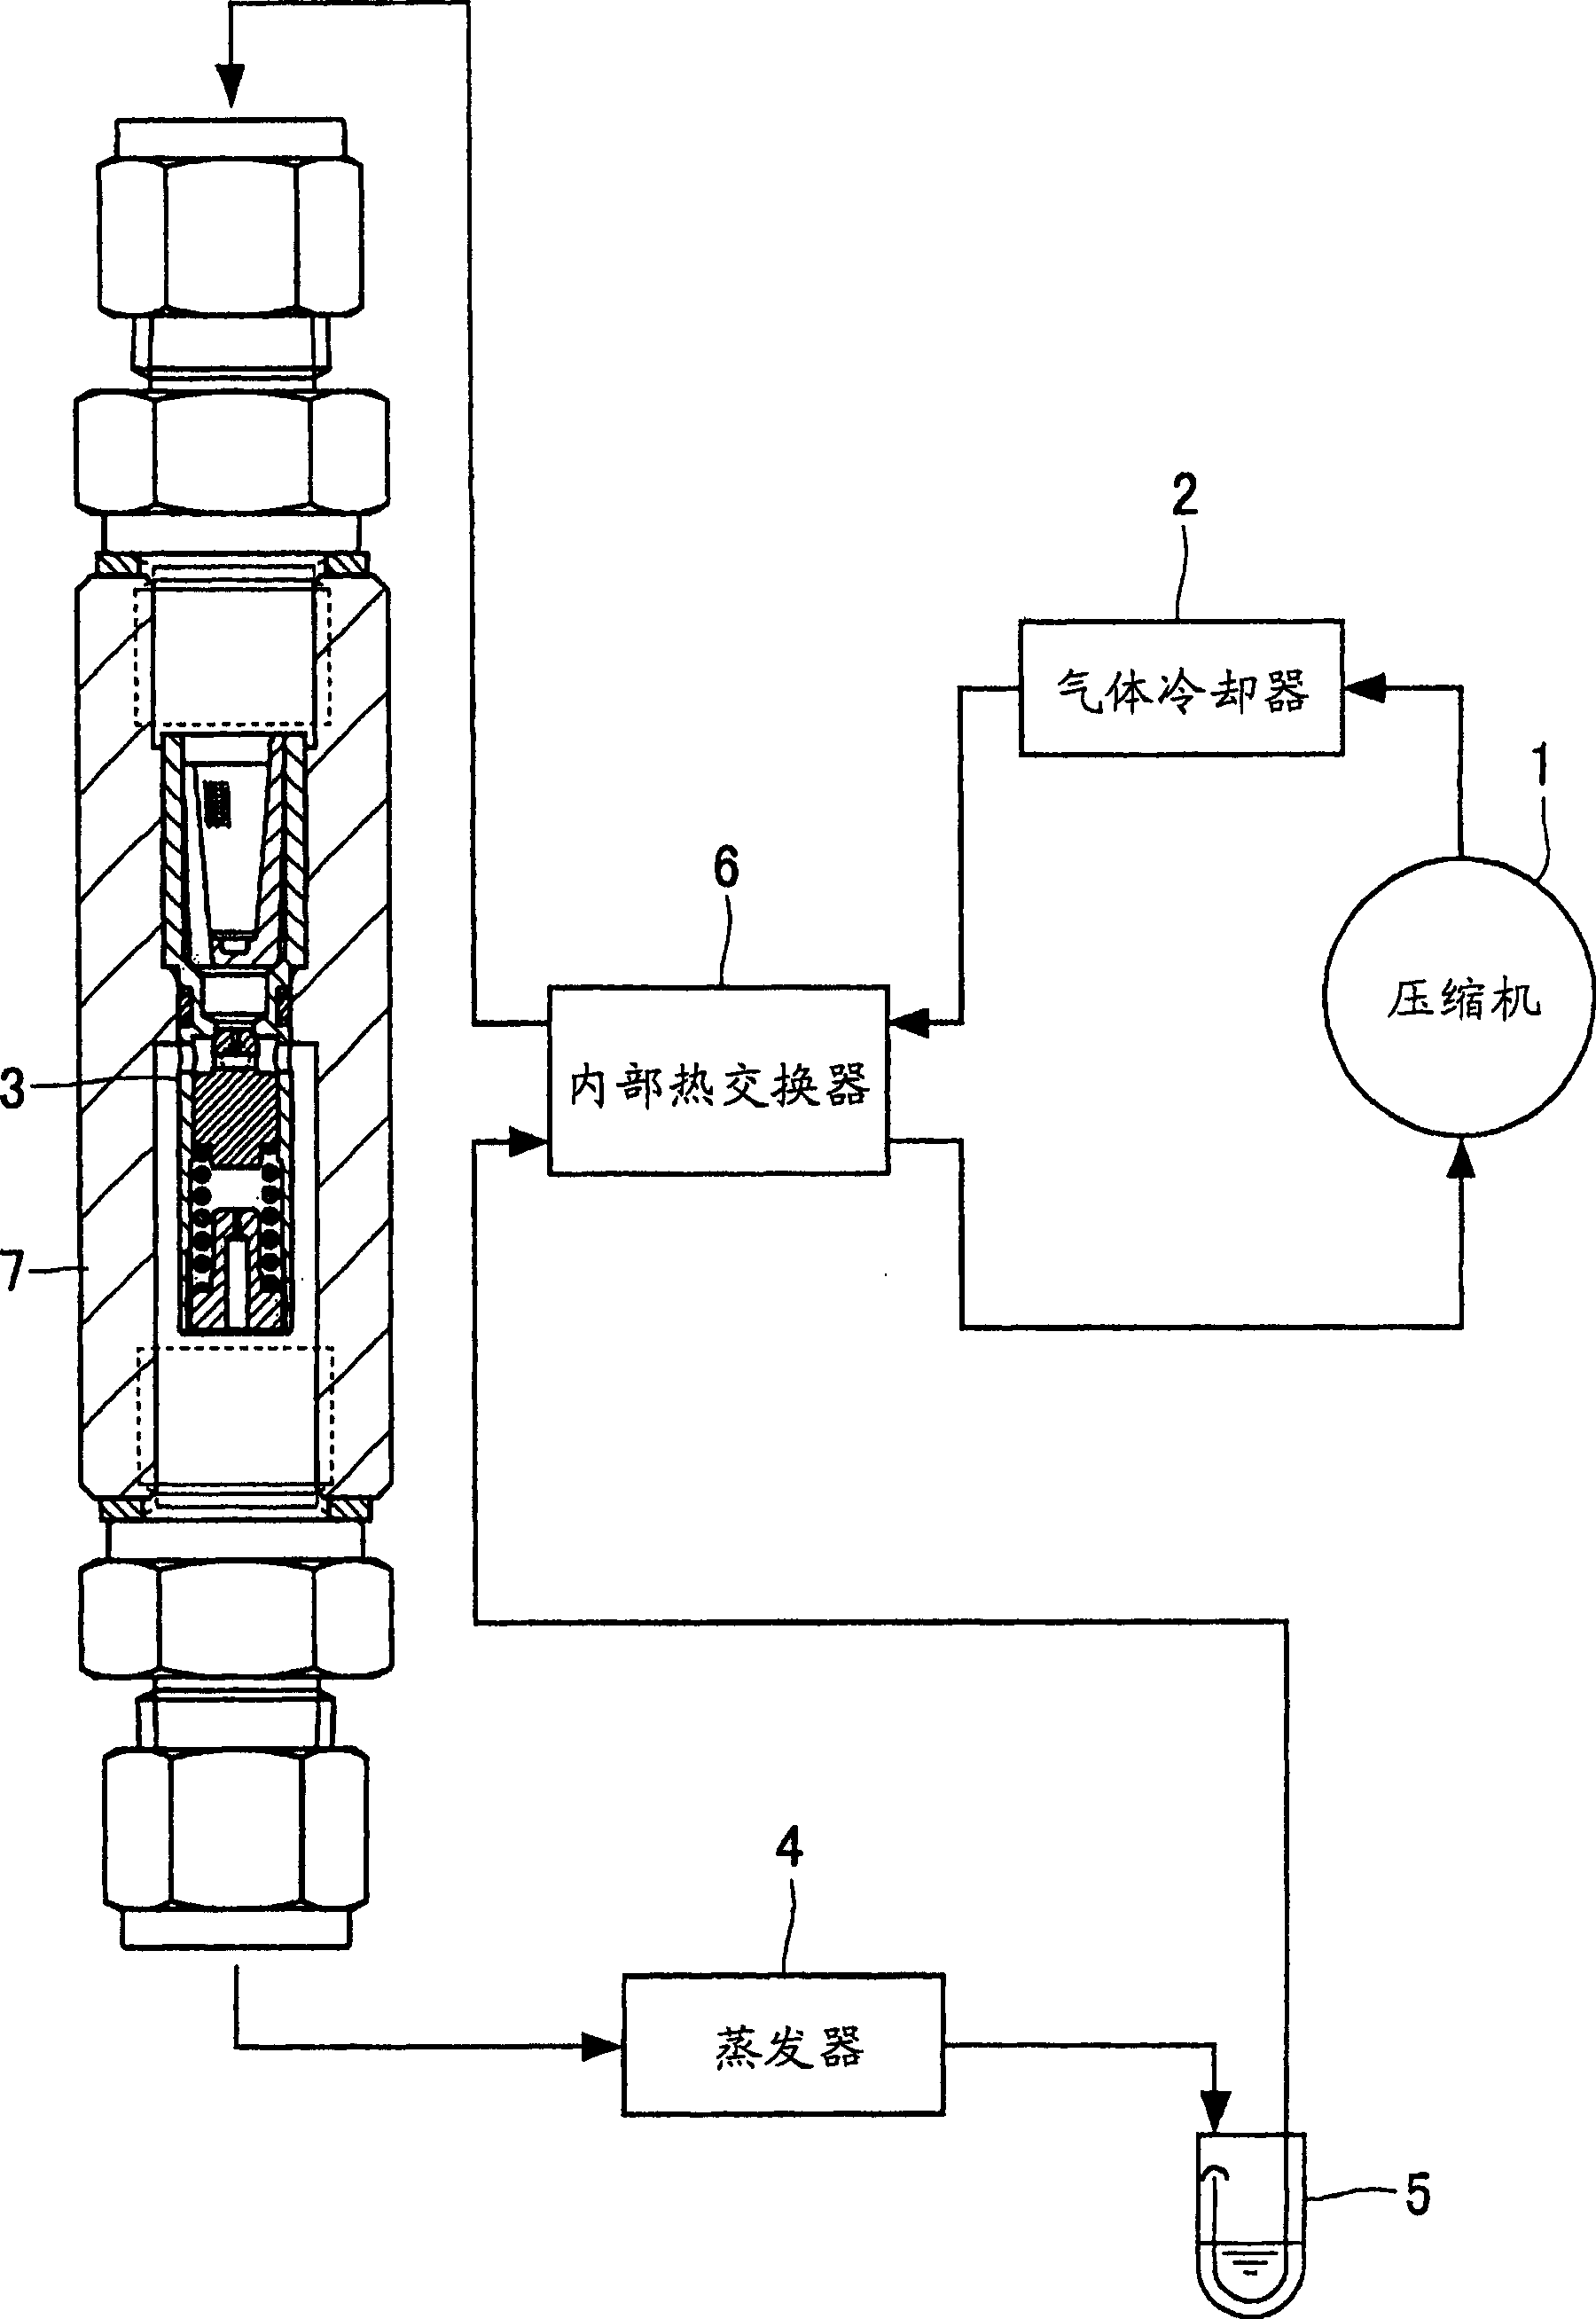 Expansion device